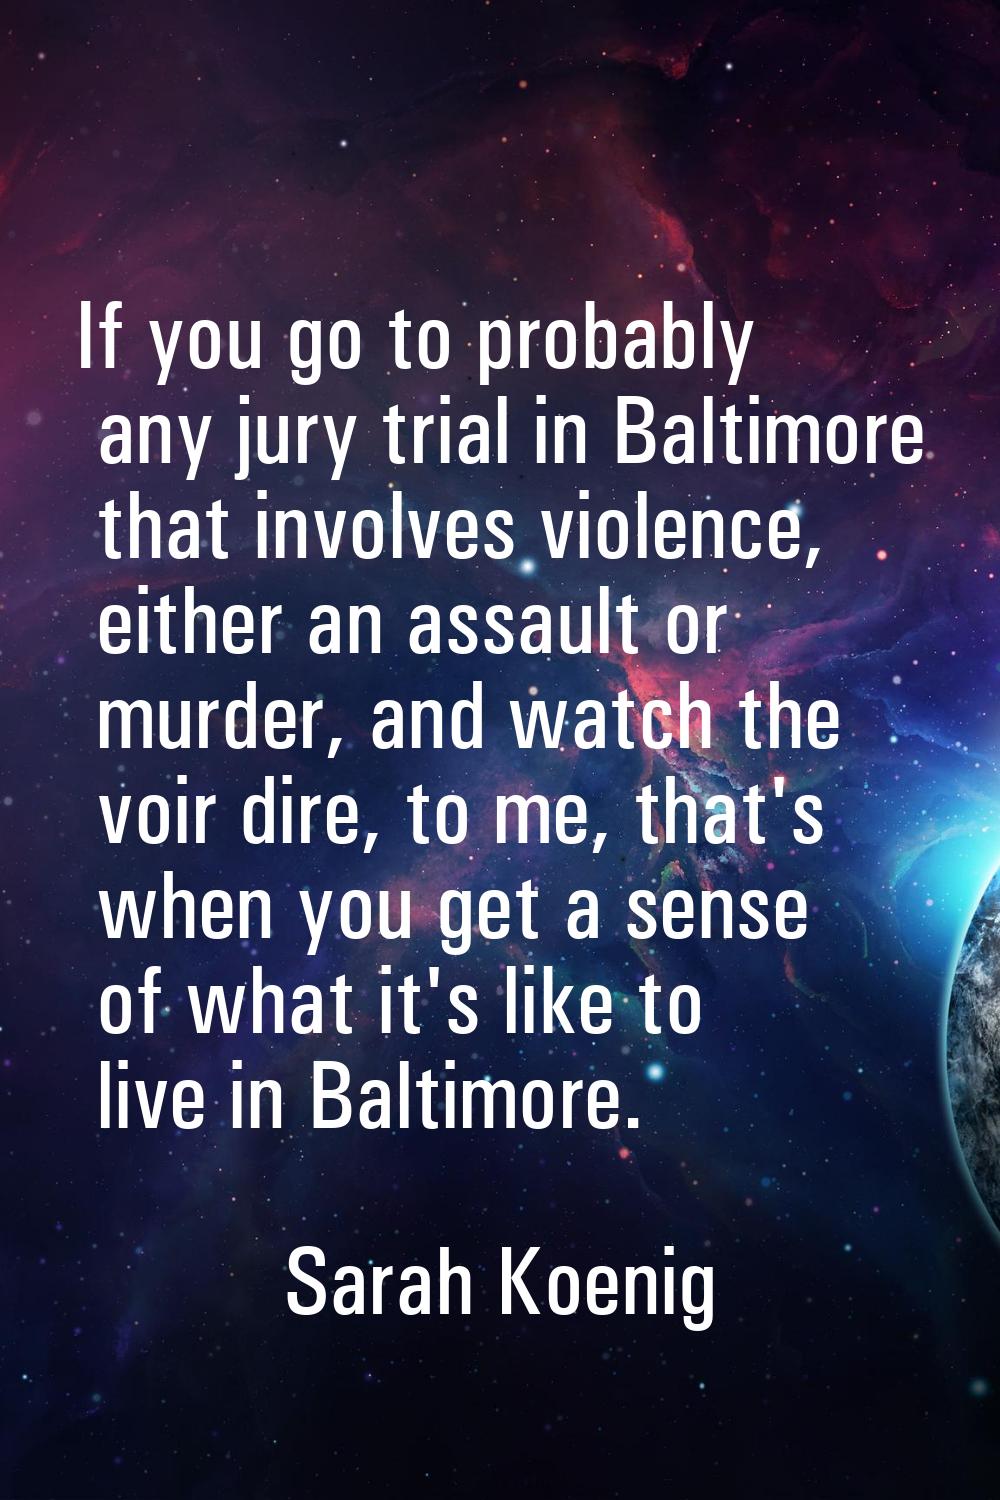 If you go to probably any jury trial in Baltimore that involves violence, either an assault or murd